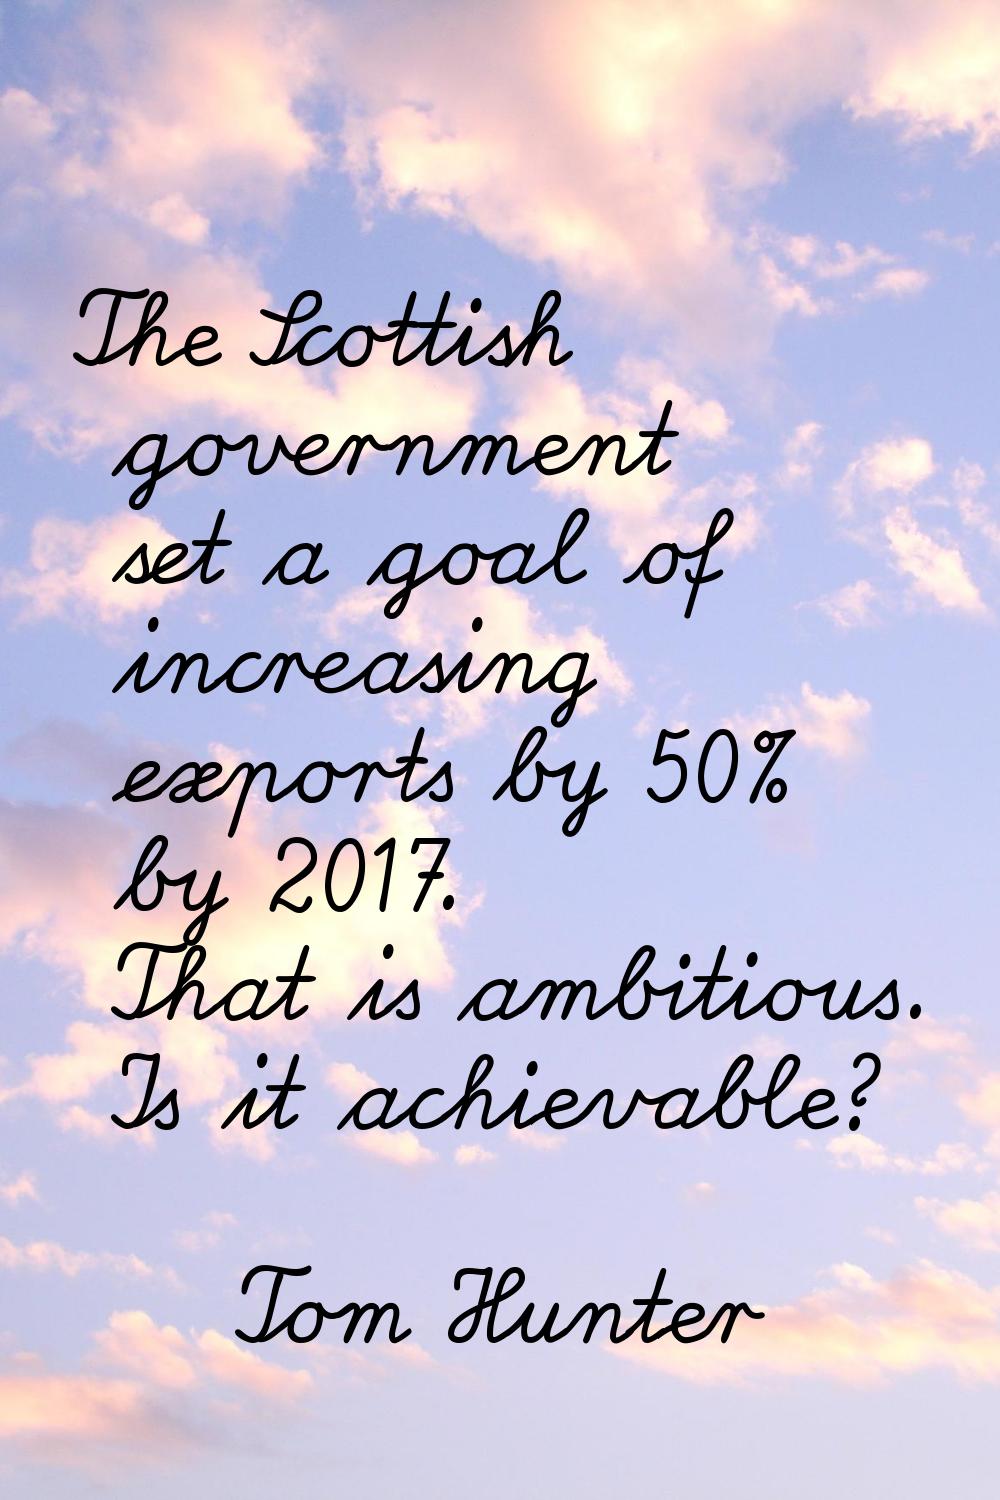 The Scottish government set a goal of increasing exports by 50% by 2017. That is ambitious. Is it a